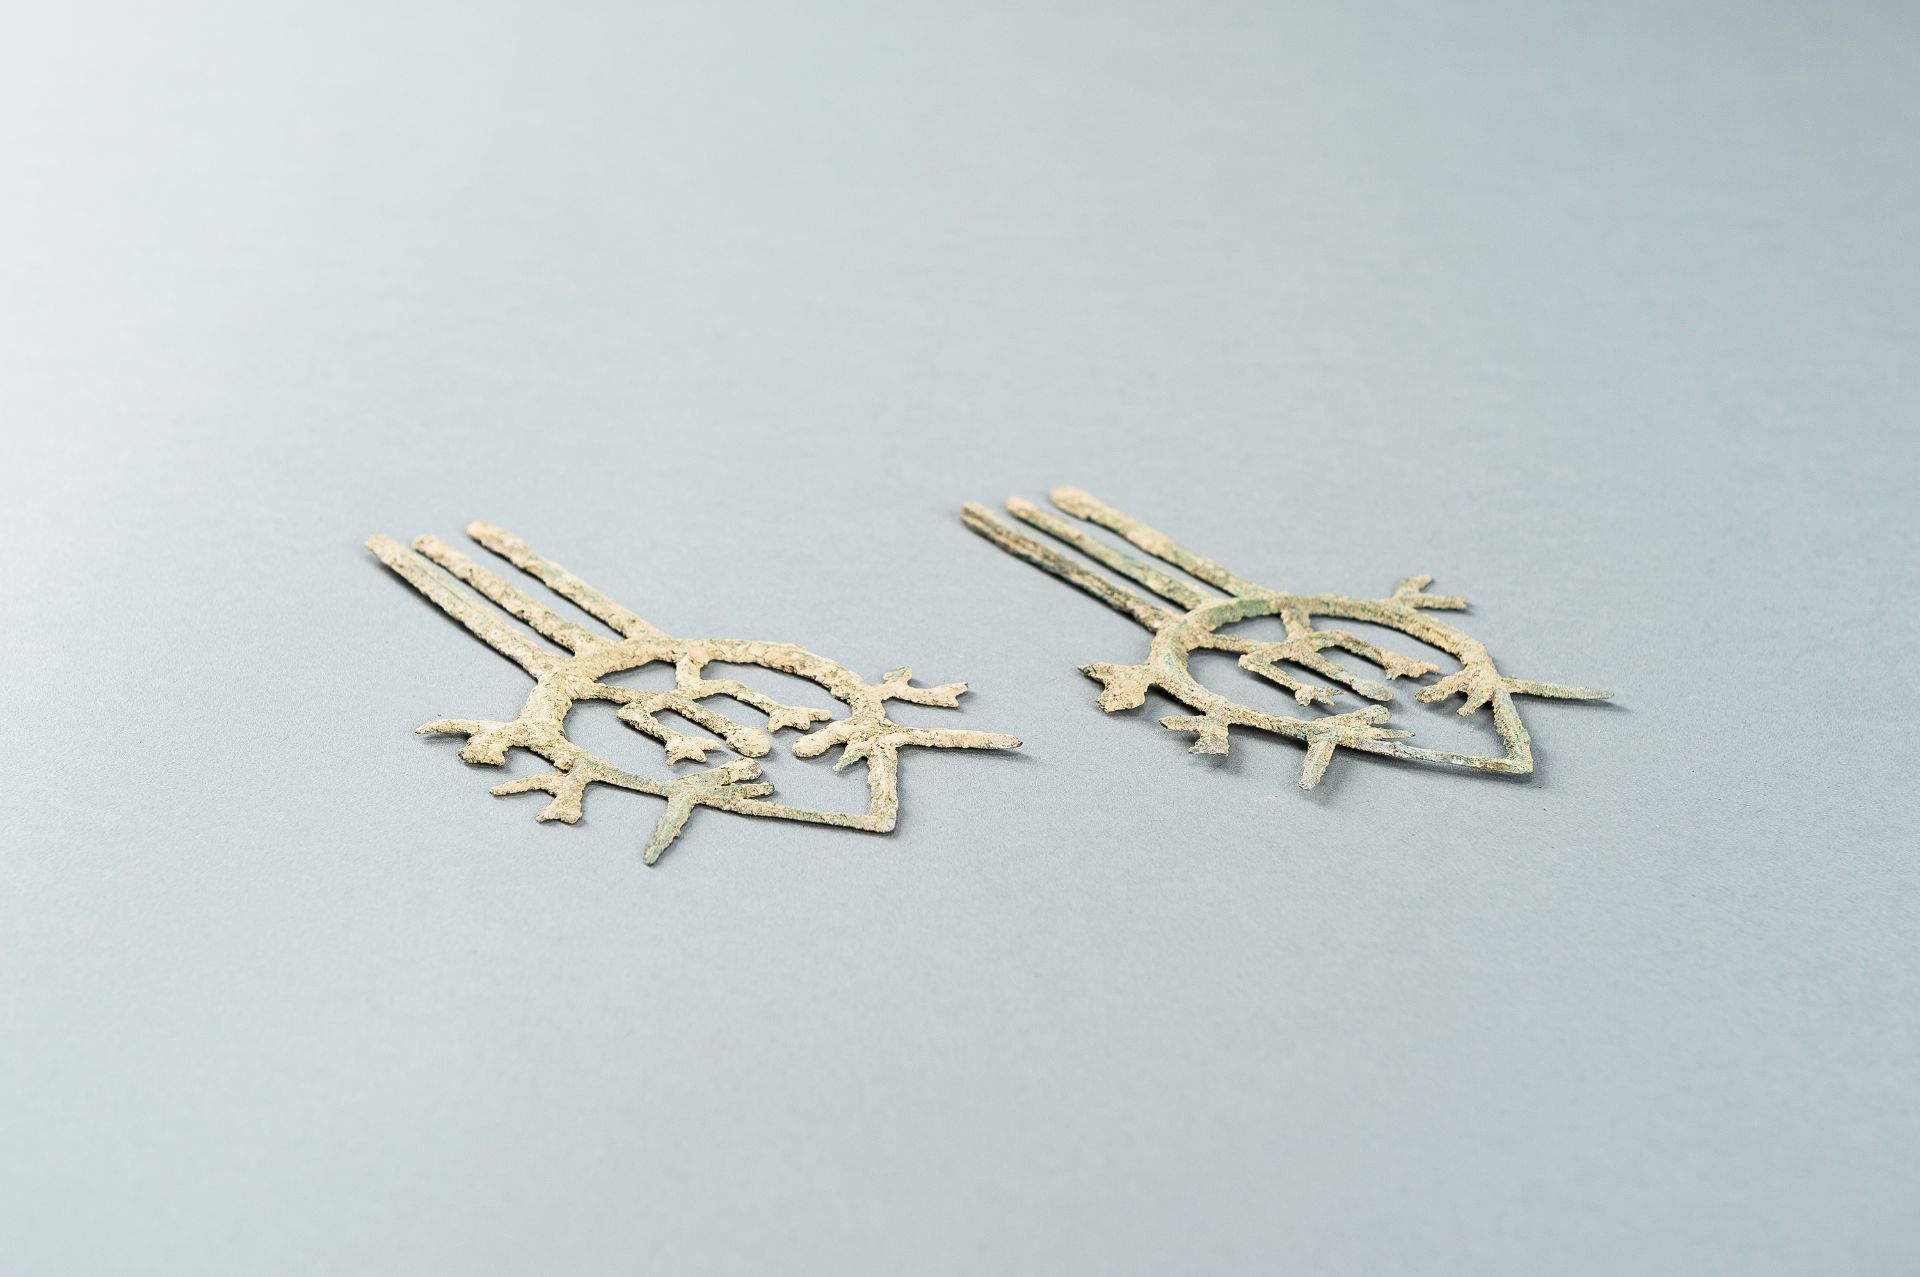 A PAIR OF BRONZE HAIRPINS, DONG SON CULTURE - Image 7 of 11